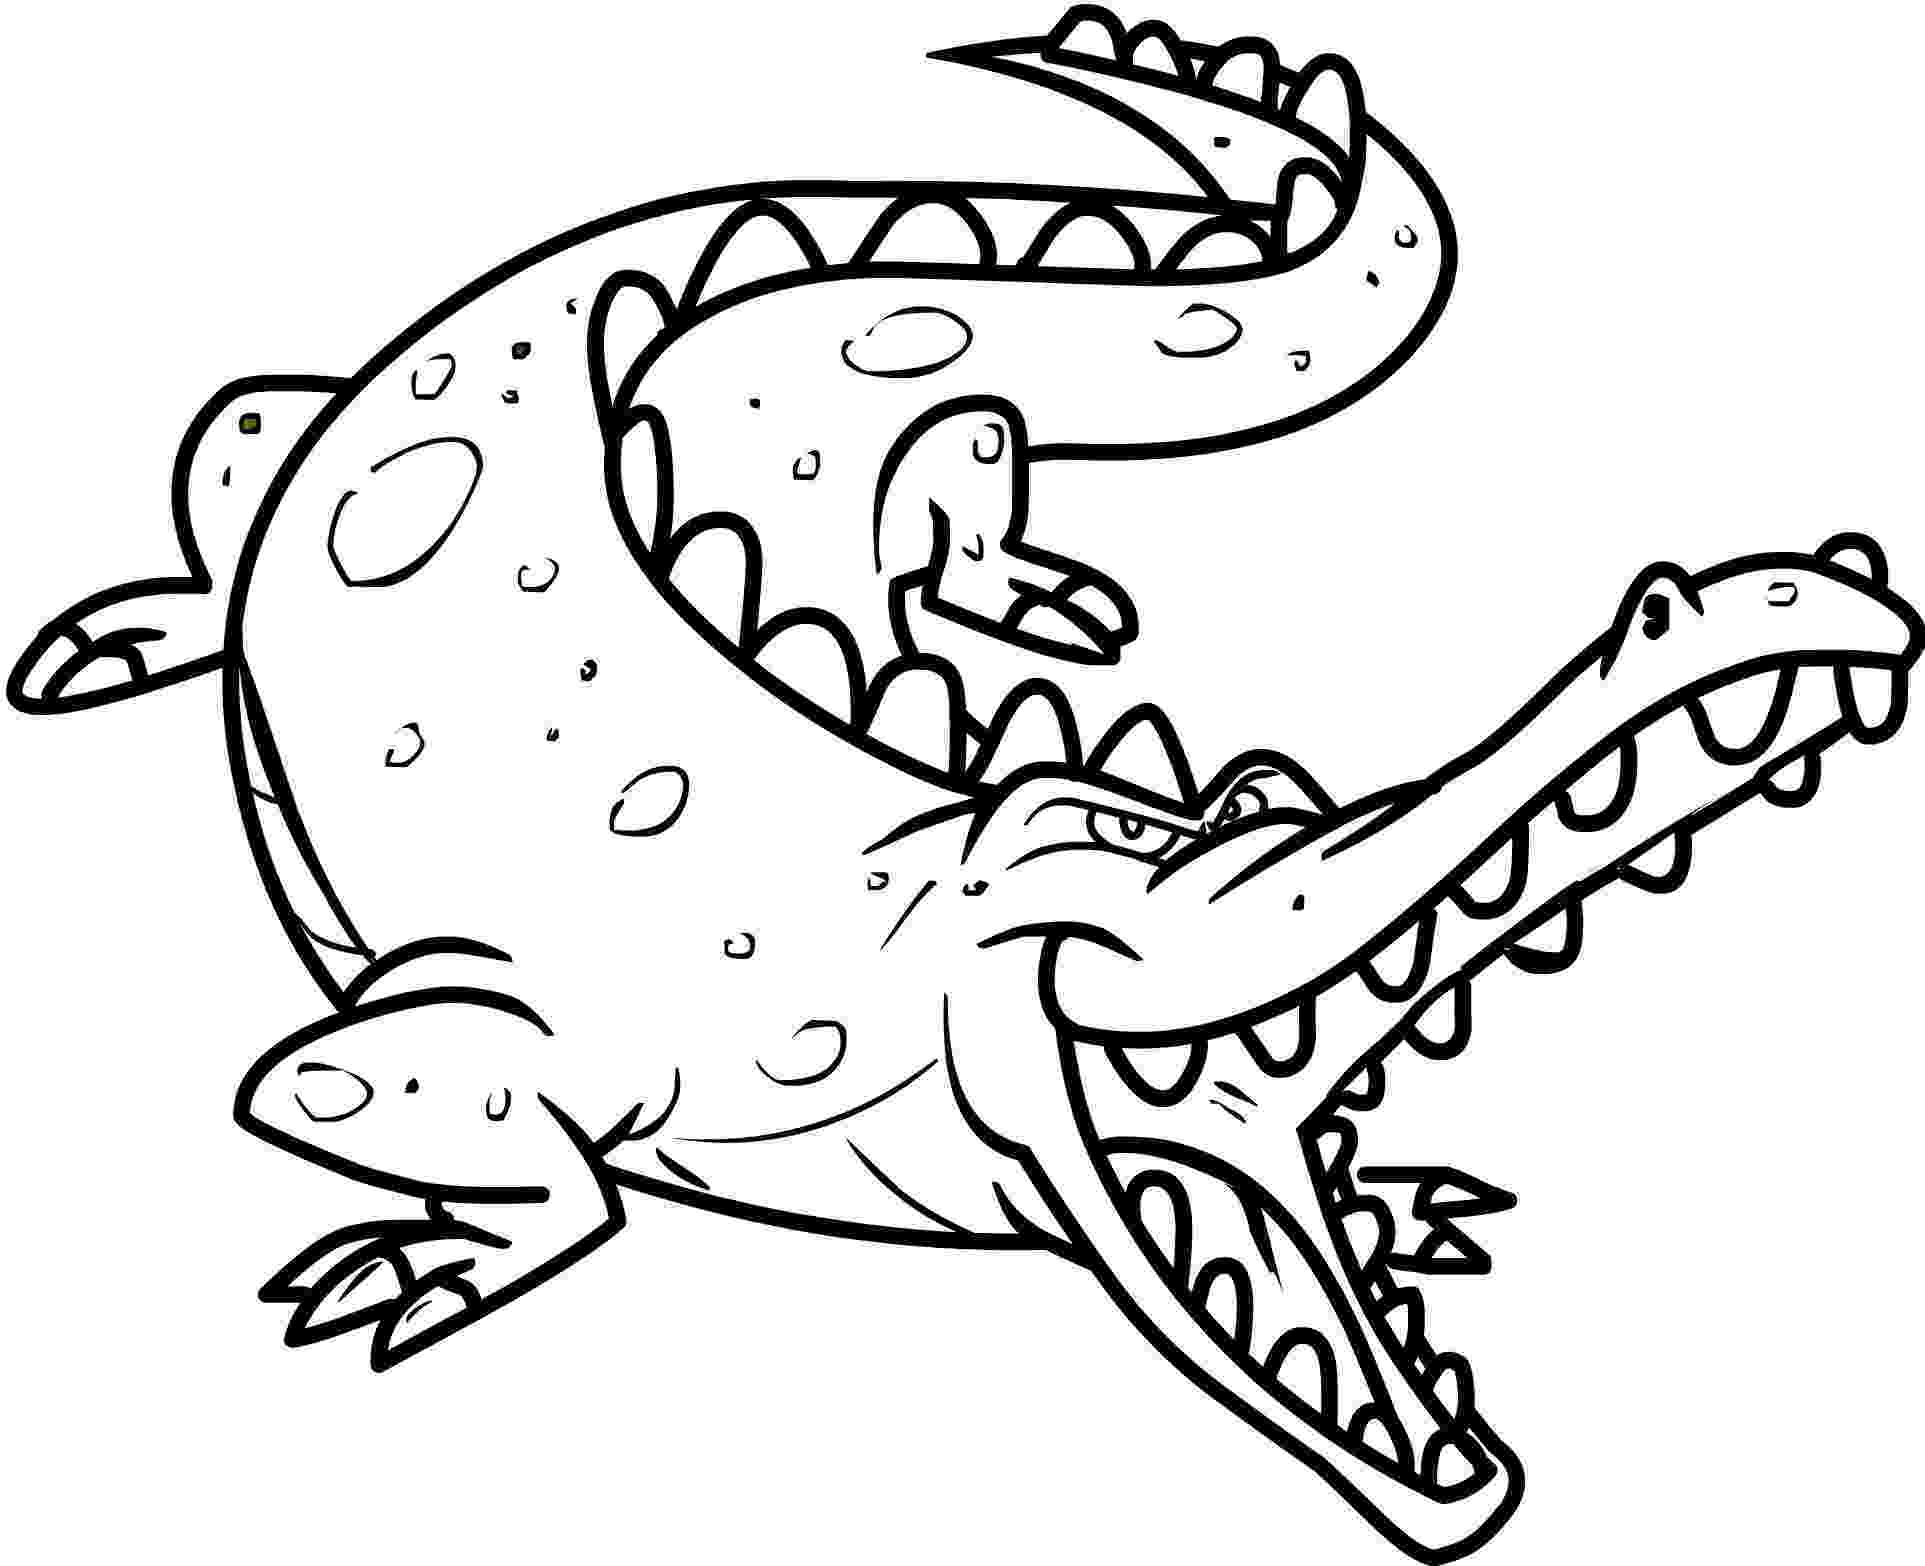 crocodile colouring page free coloring pages crocodiles page crocodile colouring 